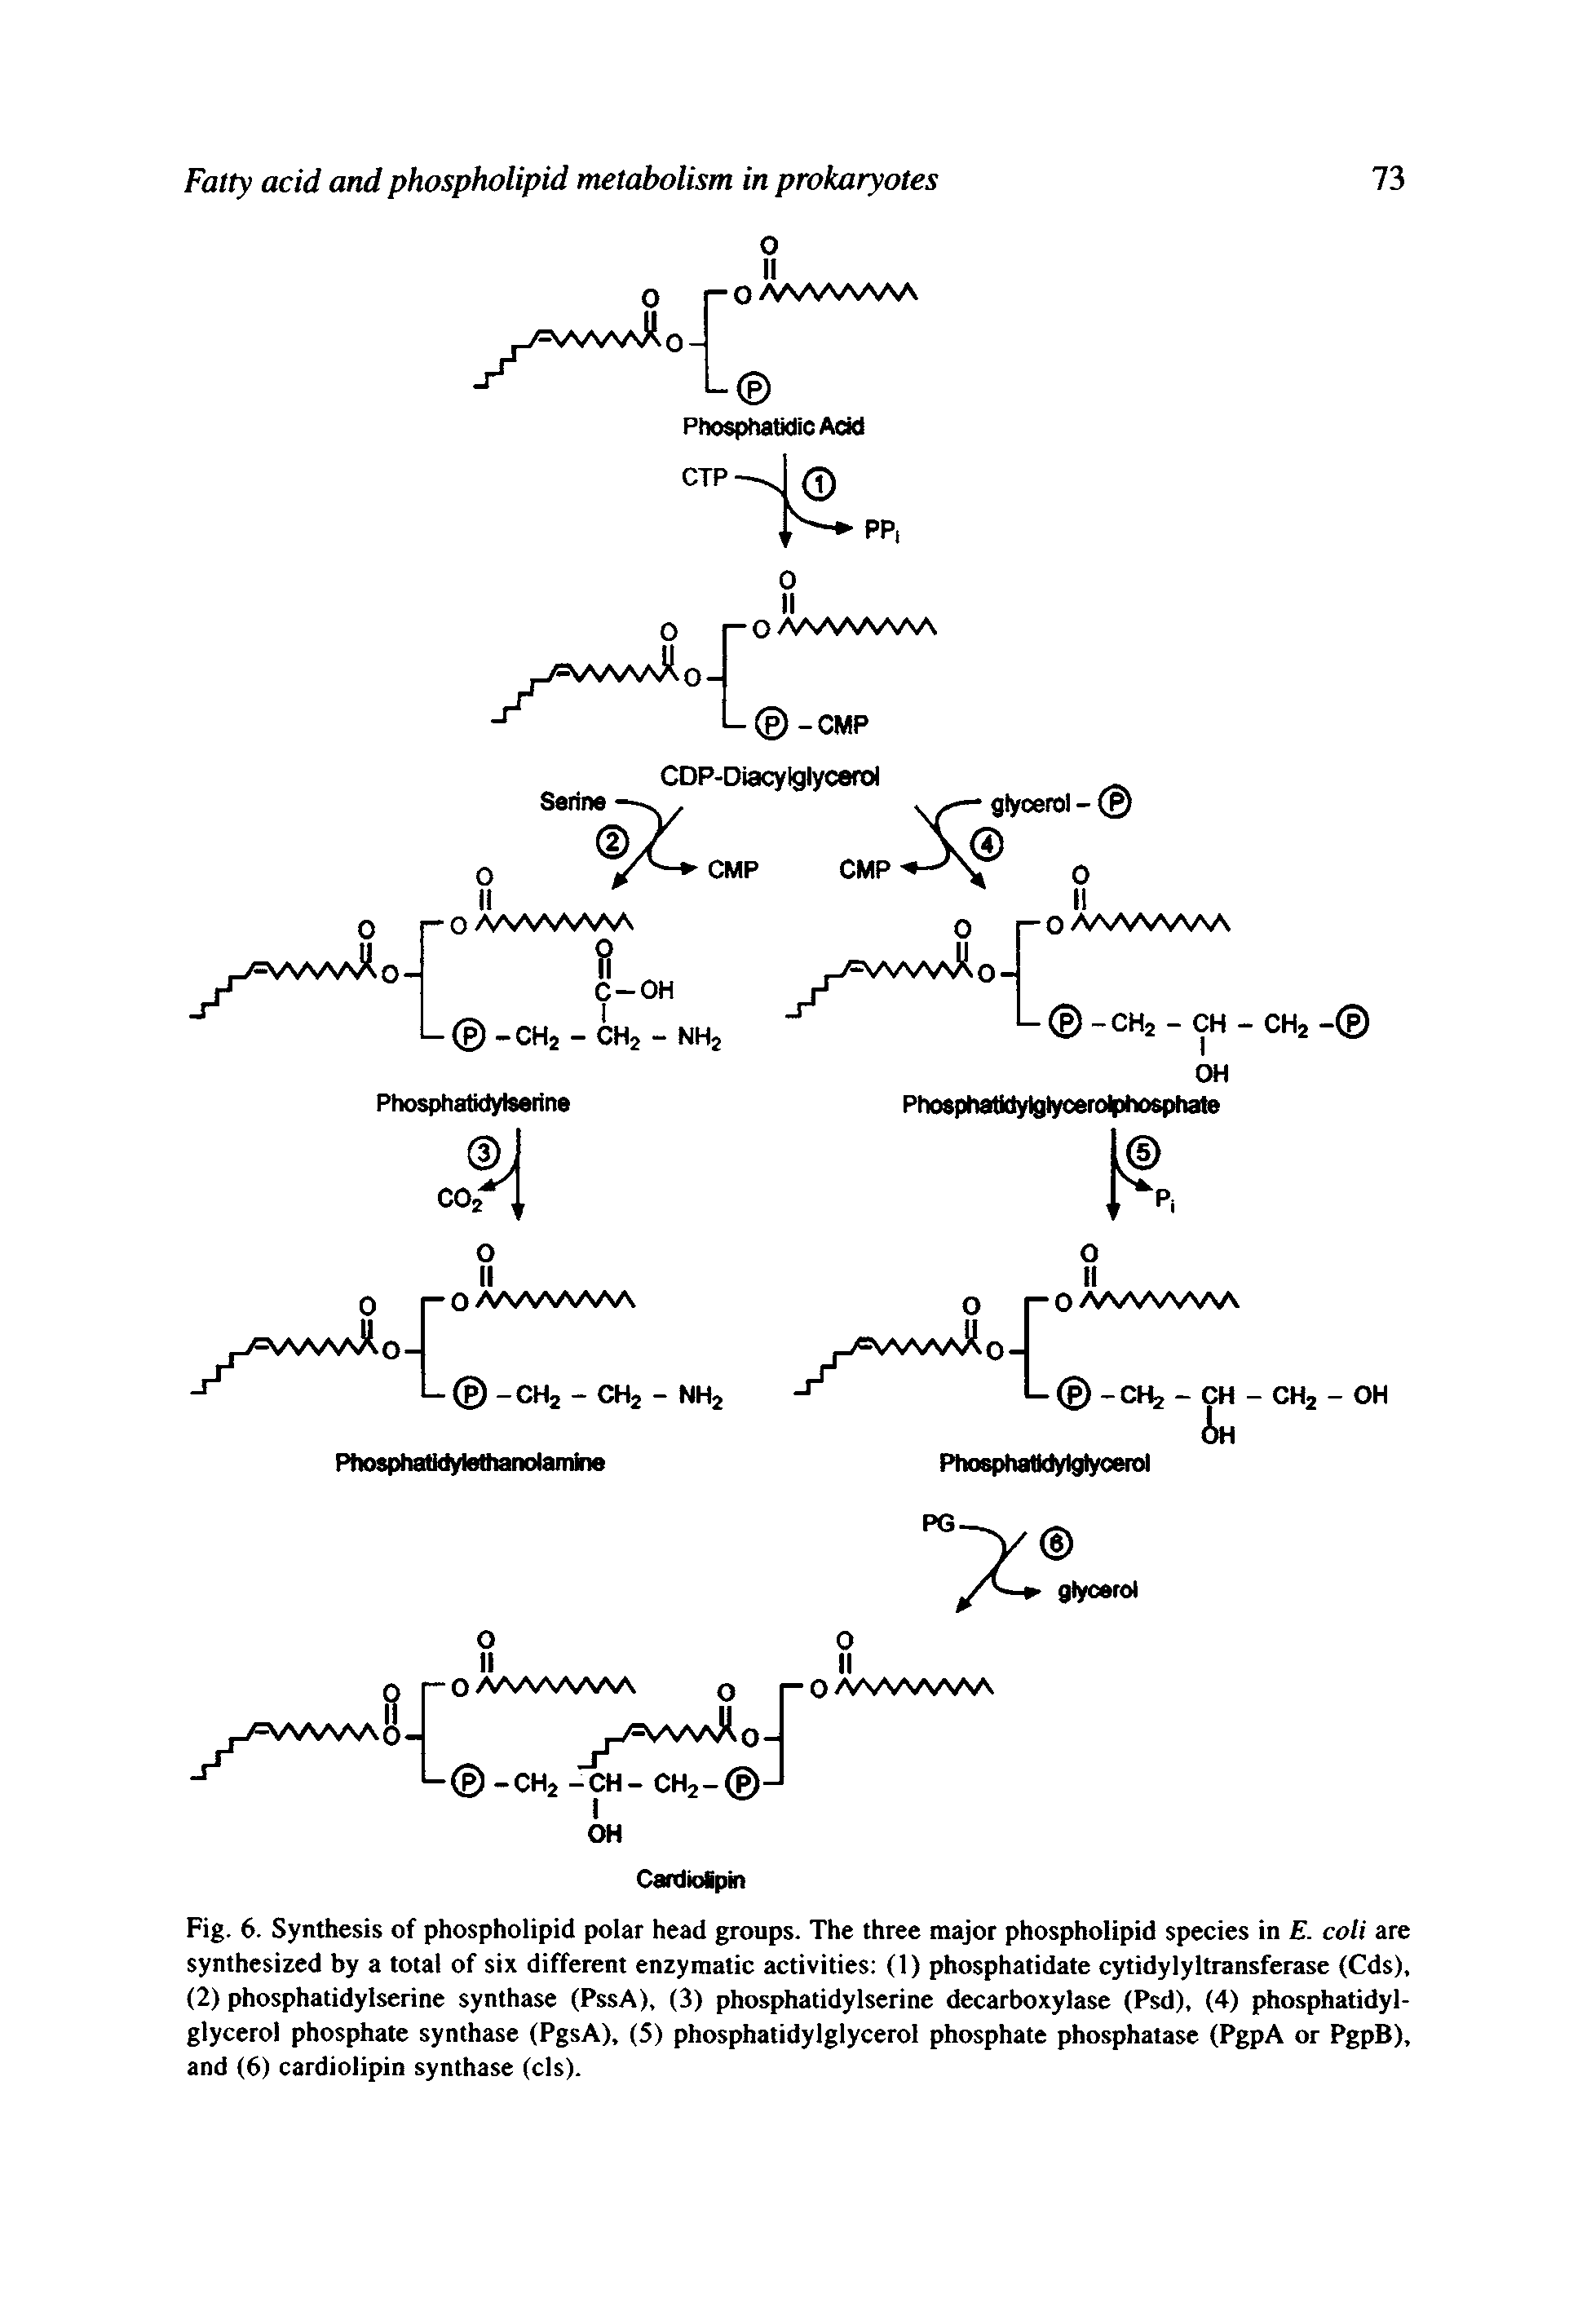 Fig. 6. Synthesis of phospholipid polar head groups. The three major phospholipid species in E. coli are synthesized by a total of six different enzymatic activities (1) phosphatidate cytidylyltransferase (Cds), (2) phosphatidylserine synthase (PssA), (3) phosphatidylserine decarboxylase (Psd), (4) phosphatidyl-glycerol phosphate synthase (PgsA), (5) phosphatidylglycerol phosphate phosphatase (PgpA or PgpB), and (6) cardiolipin synthase (els).